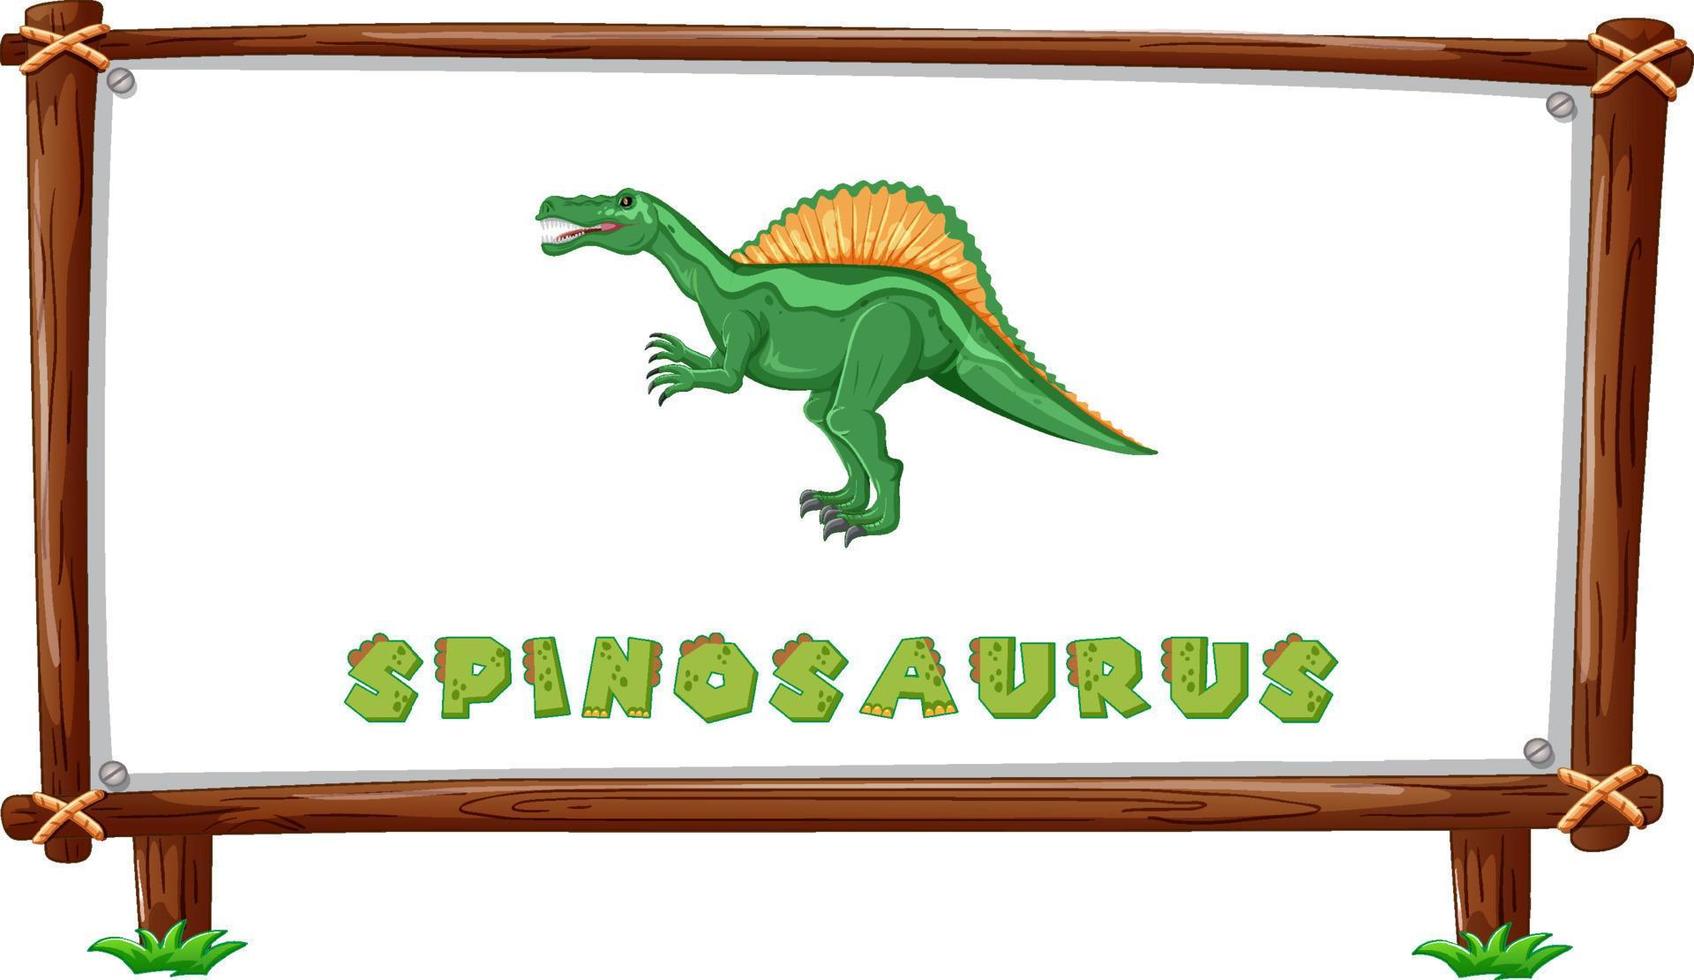 Frame template with dinosaurs and text spinosaurus design inside vector